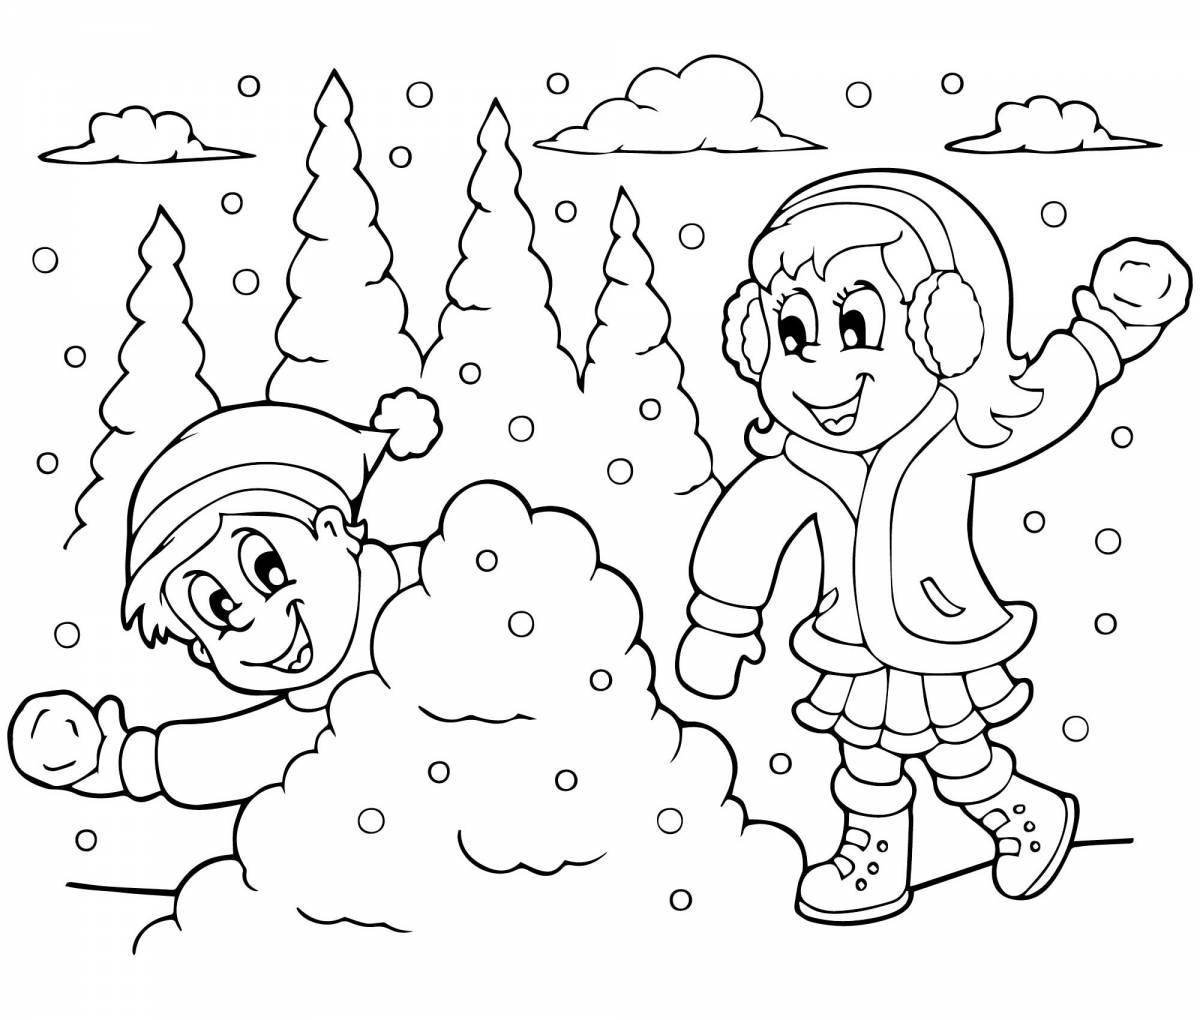 Awesome coloring page 4 5 years of winter